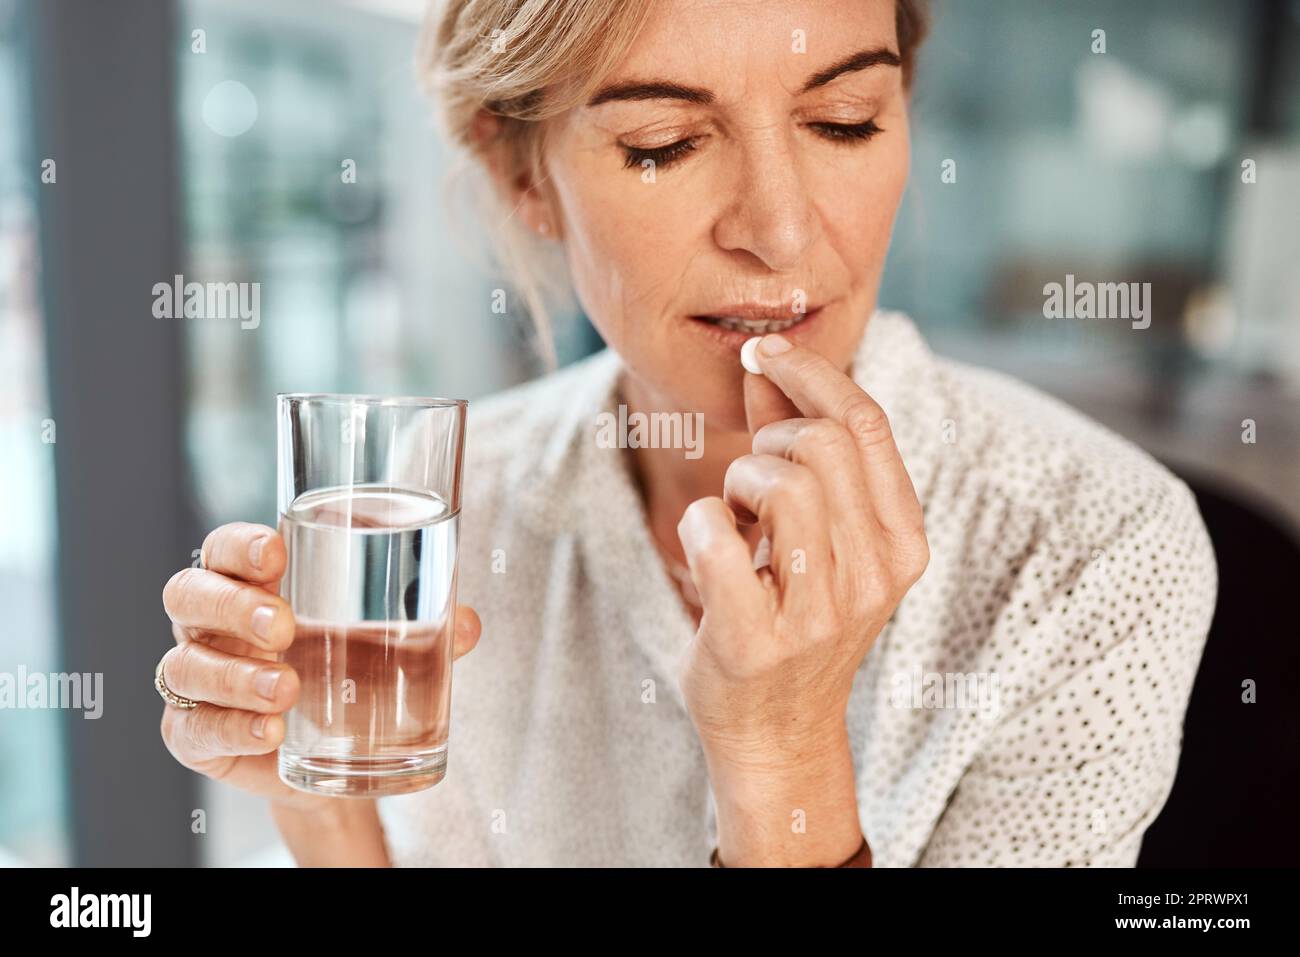 This aspirin should take care of my headache. a mature businesswoman taking medication in an office. Stock Photo